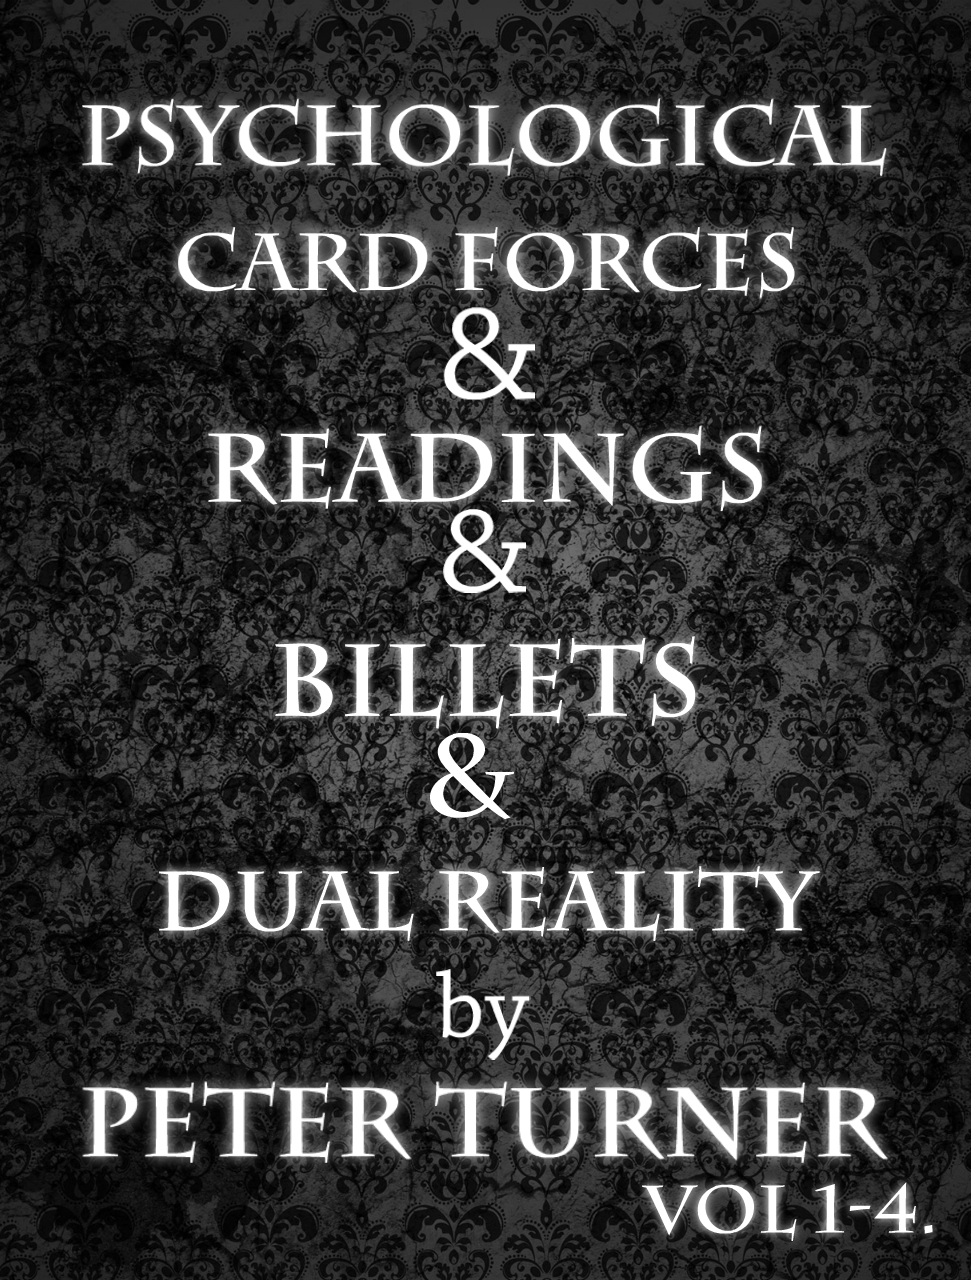 Mentalism Masterclass Vol 1-4 by Peter Turner (Psychological Card Forces, Readings, Dual Reality, Billets)